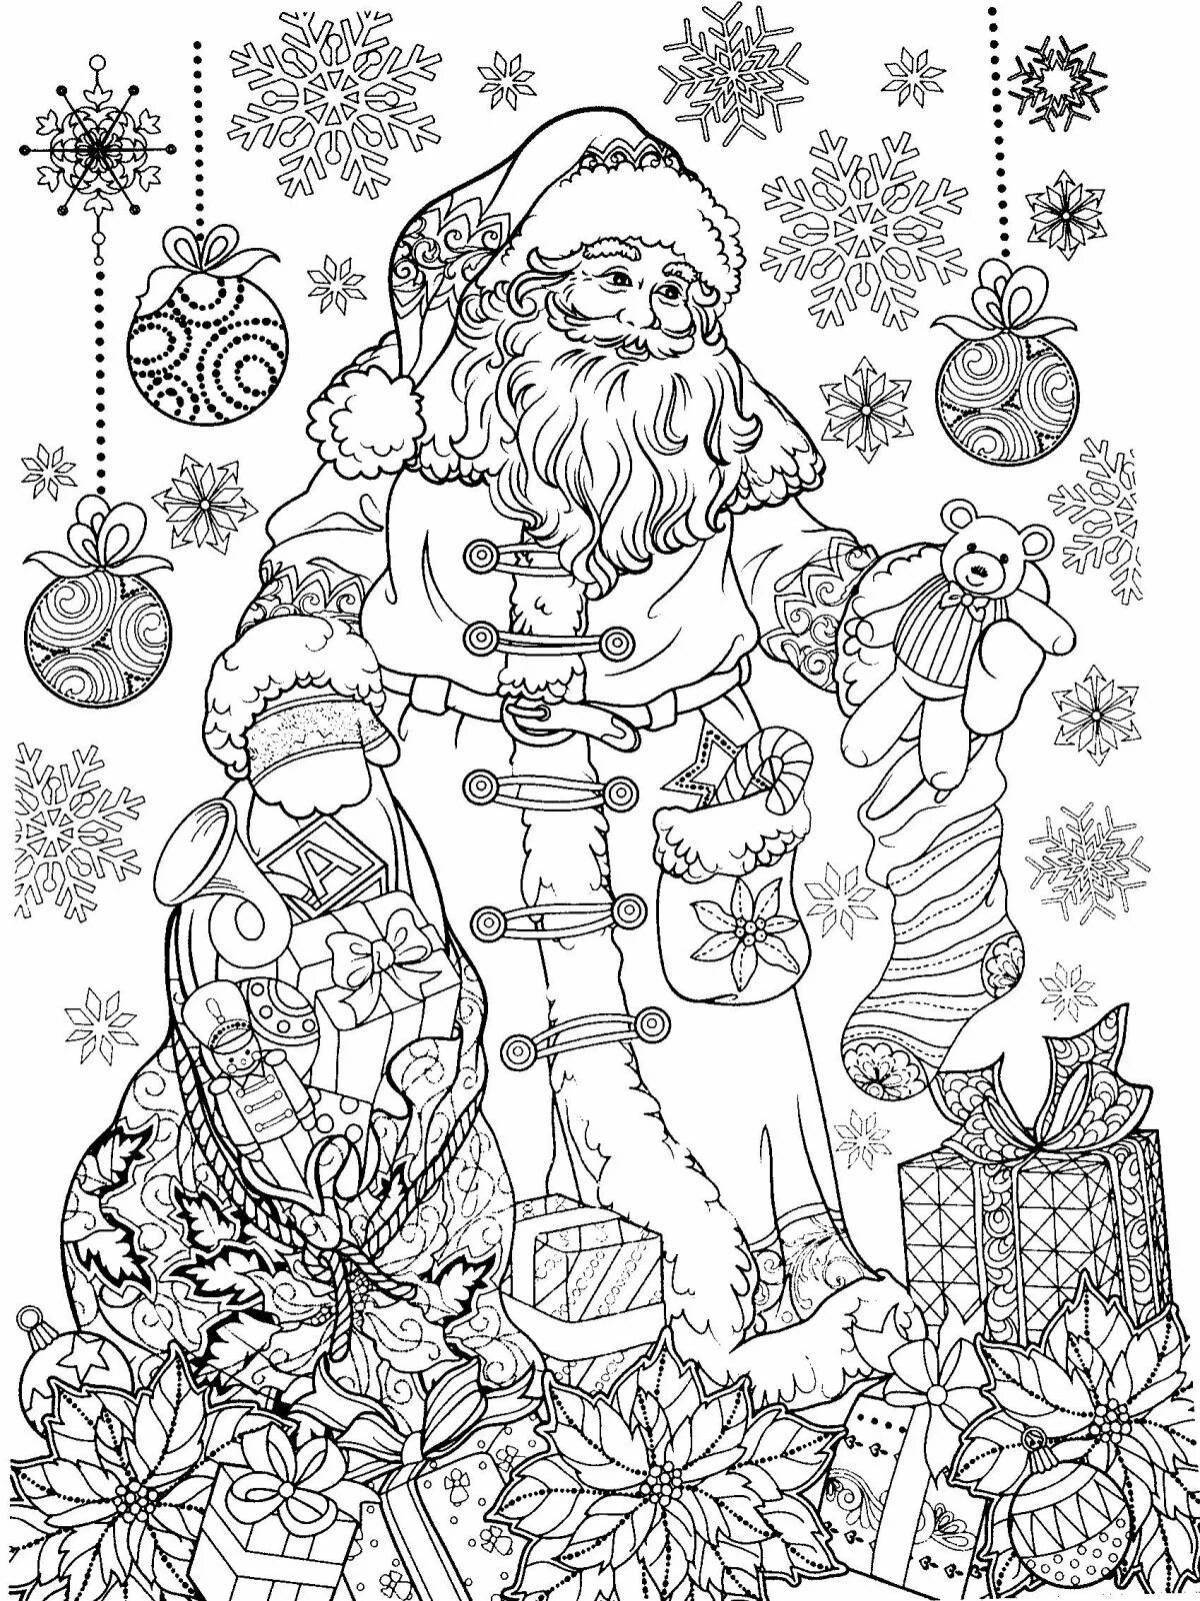 Great Christmas coloring book for adults